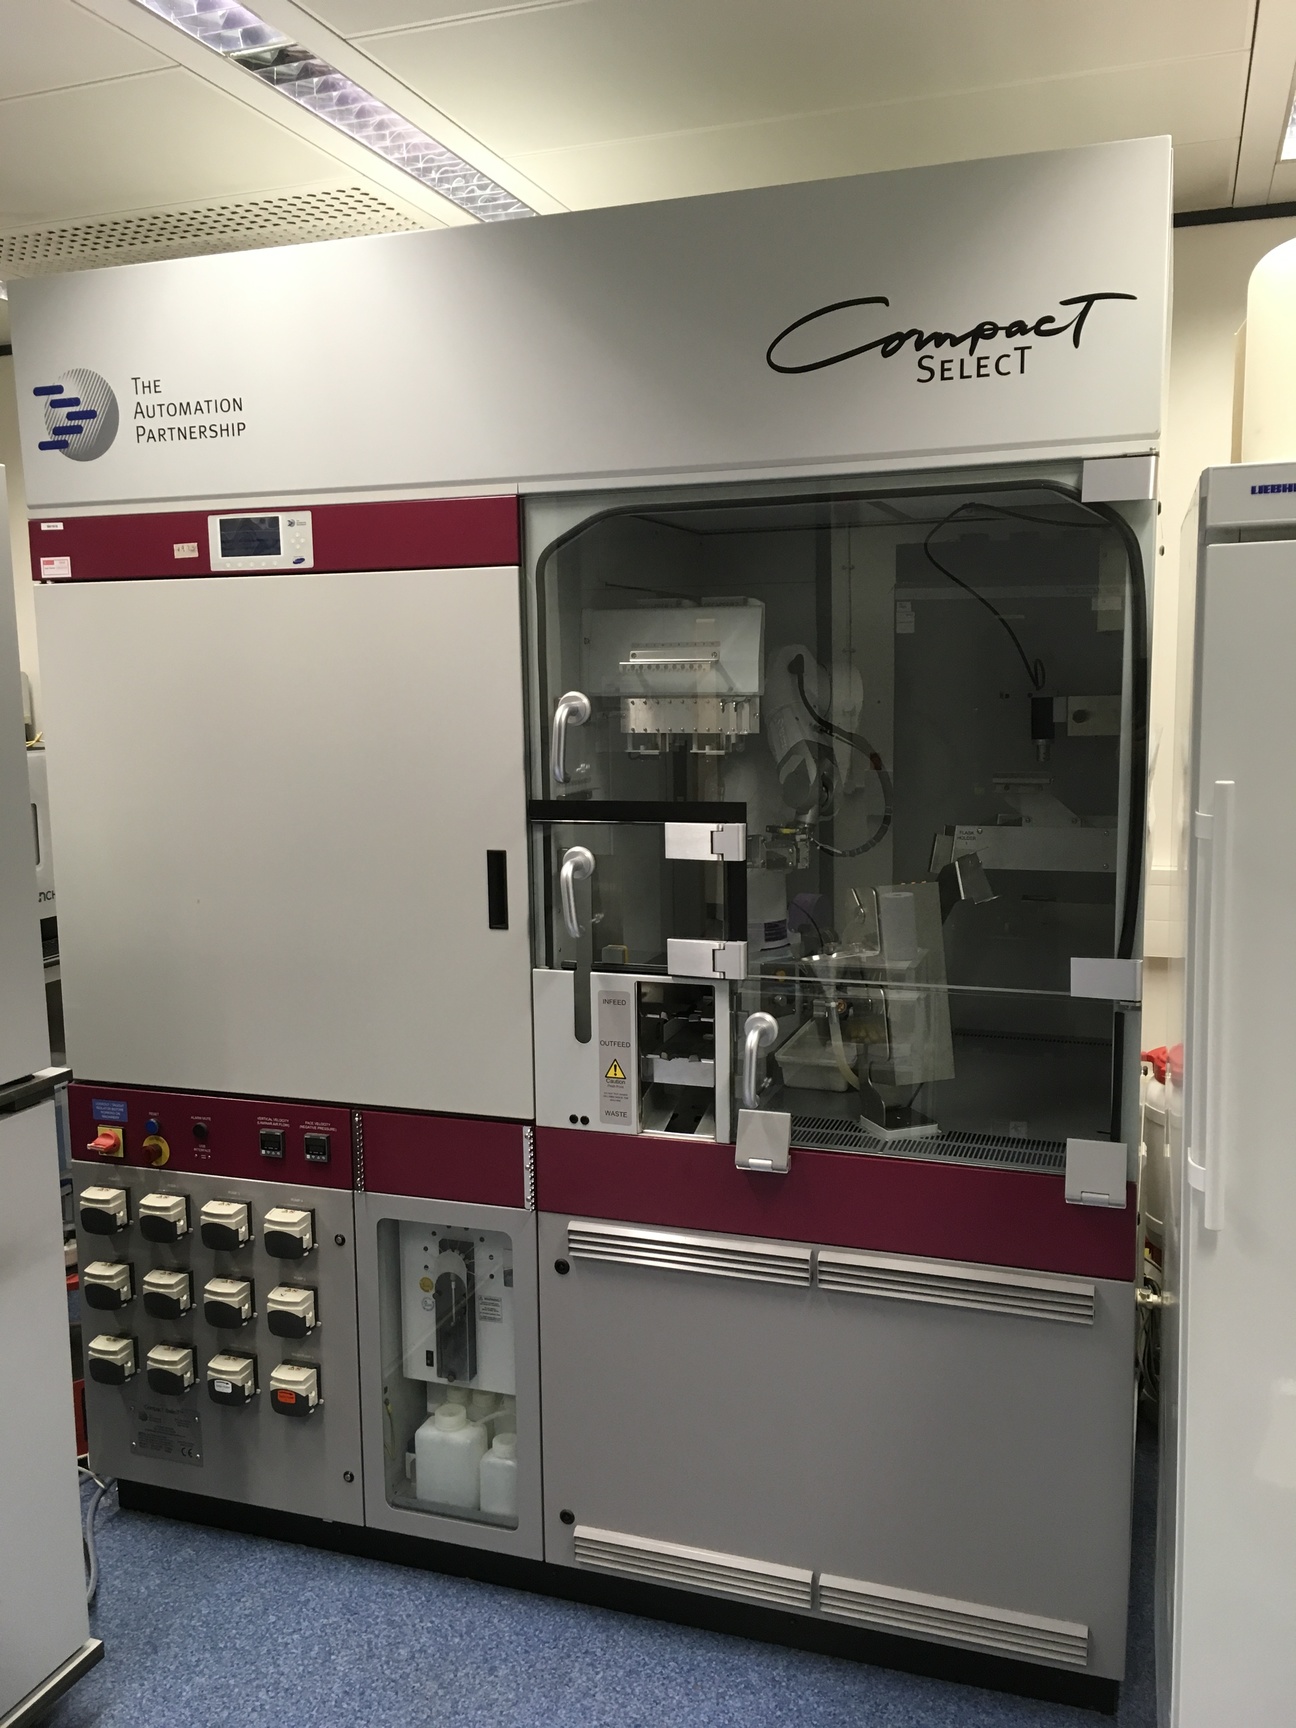 Automation Partnership Compact Select Automated Robotic Cell Culture System